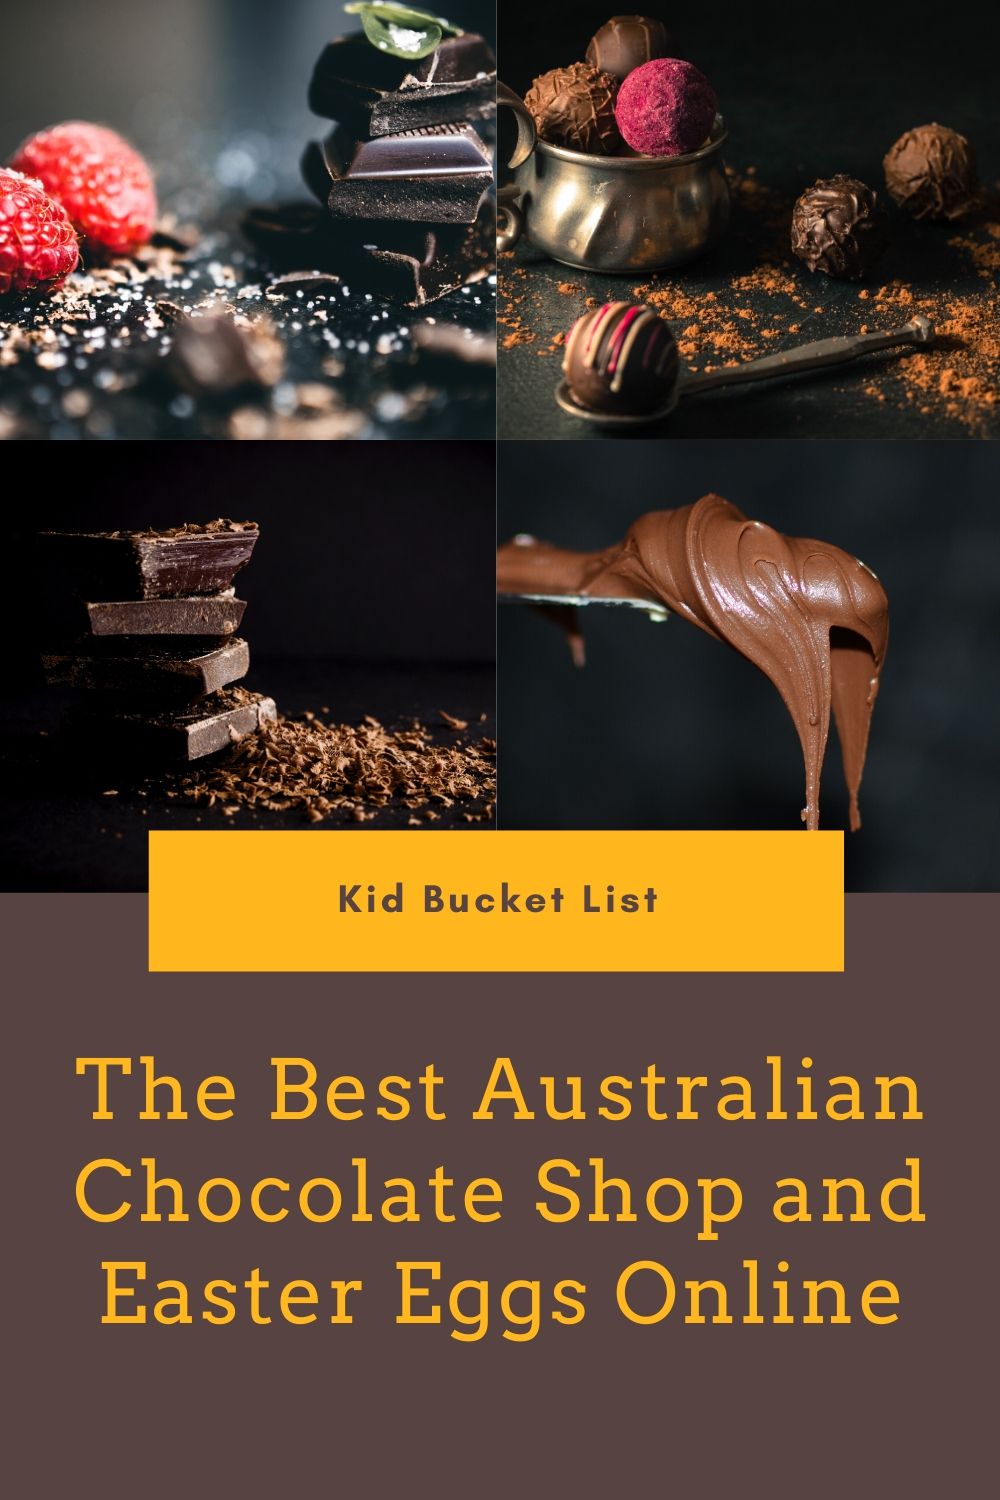 The Best Australian Chocolate Shop and Easter Eggs Online